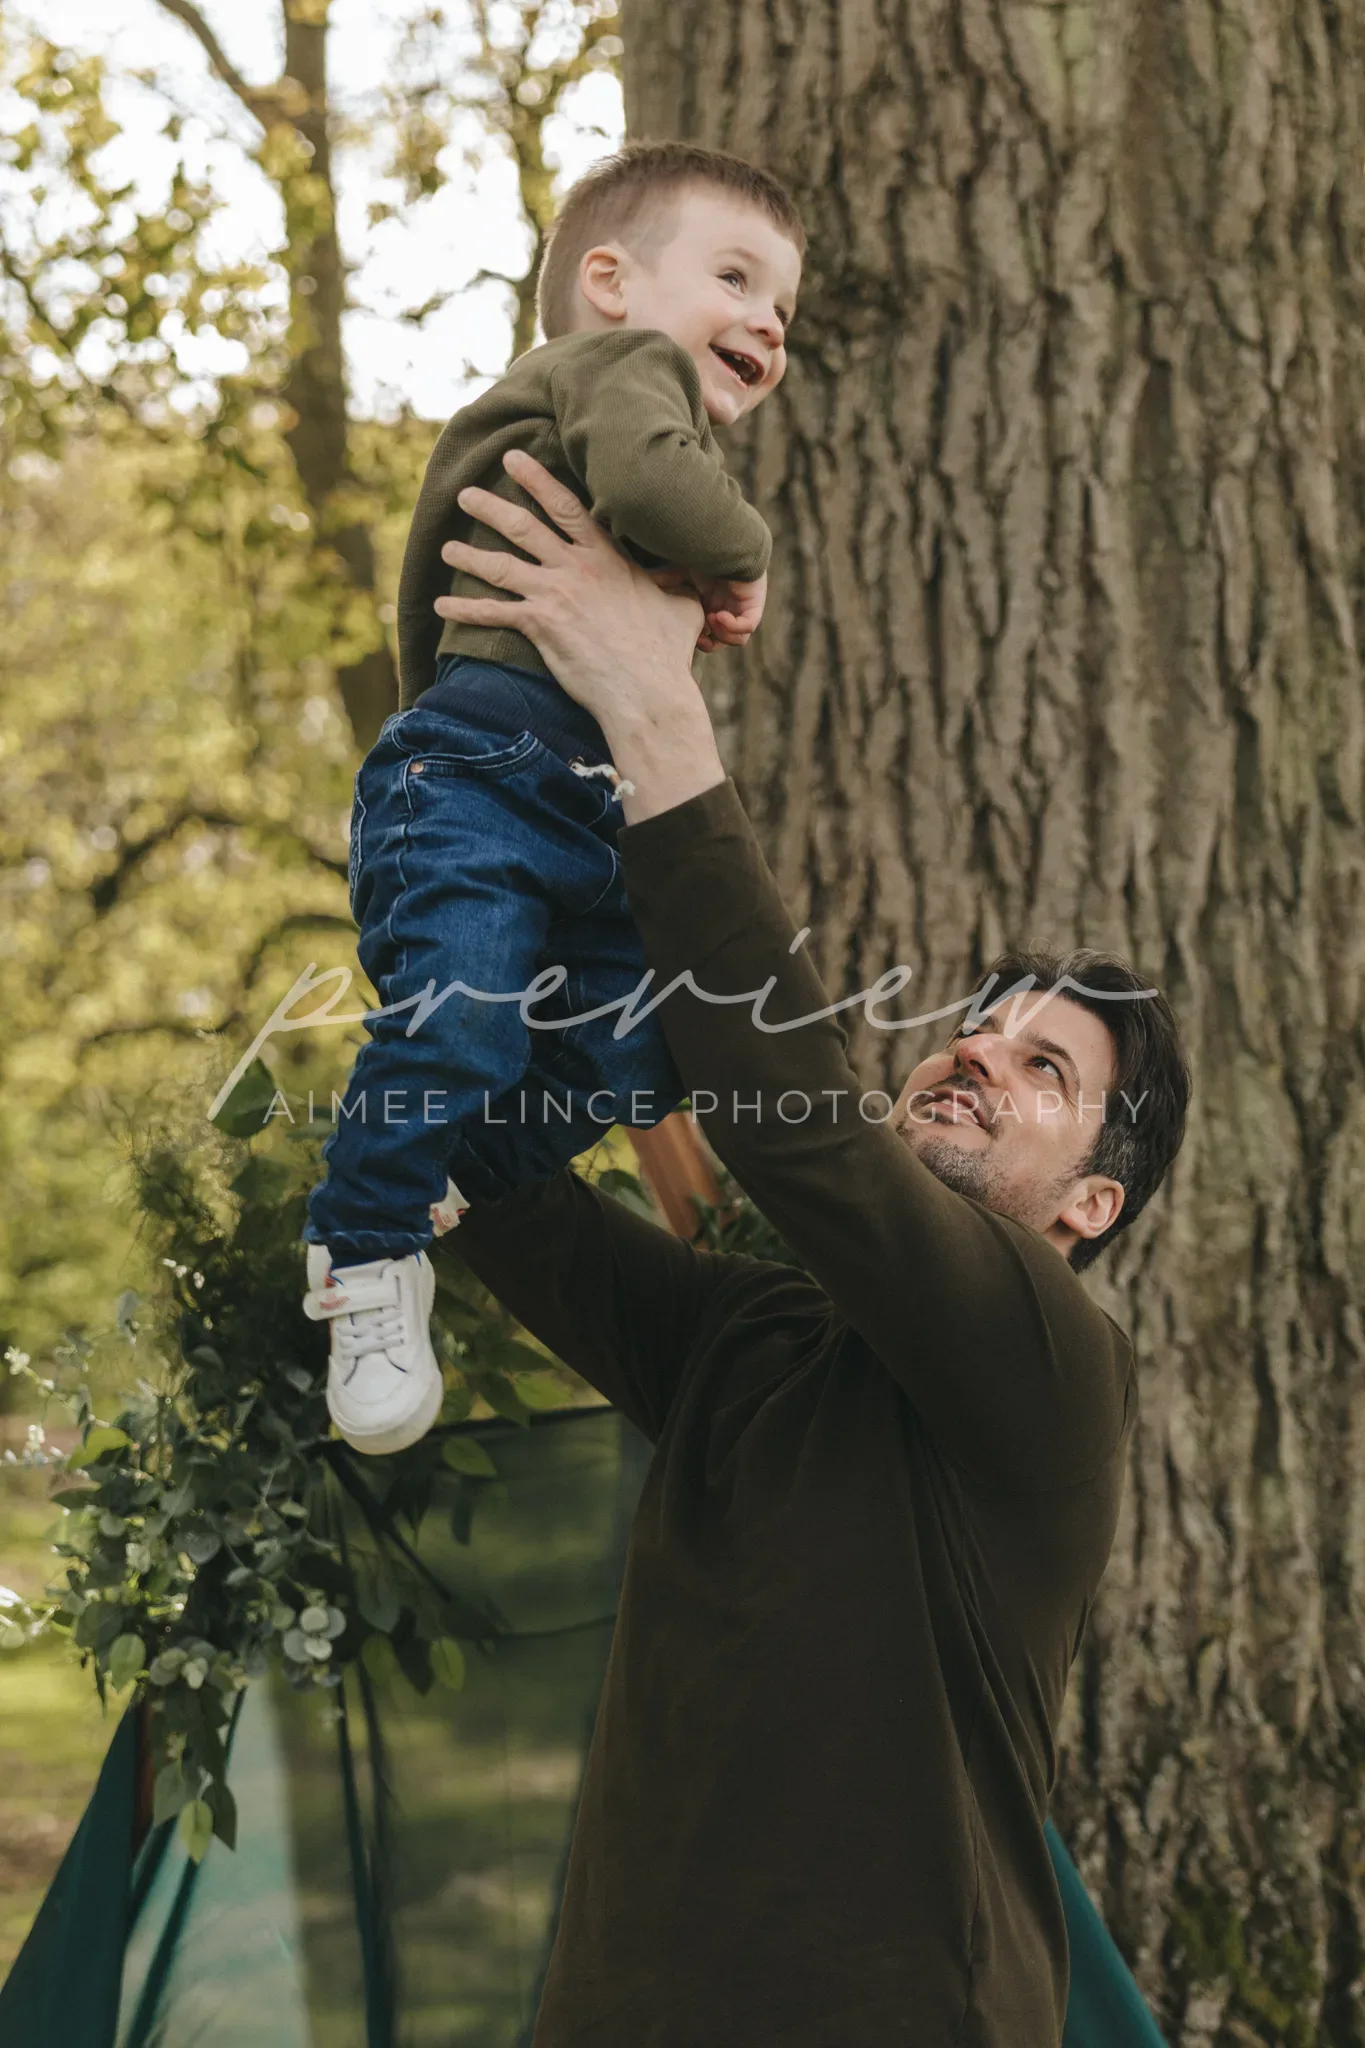 A joyful man outdoors lifts a laughing toddler high in the air against the backdrop of a large tree. both are dressed in casual long-sleeved tops, sharing a moment of happiness in a sunlit park.